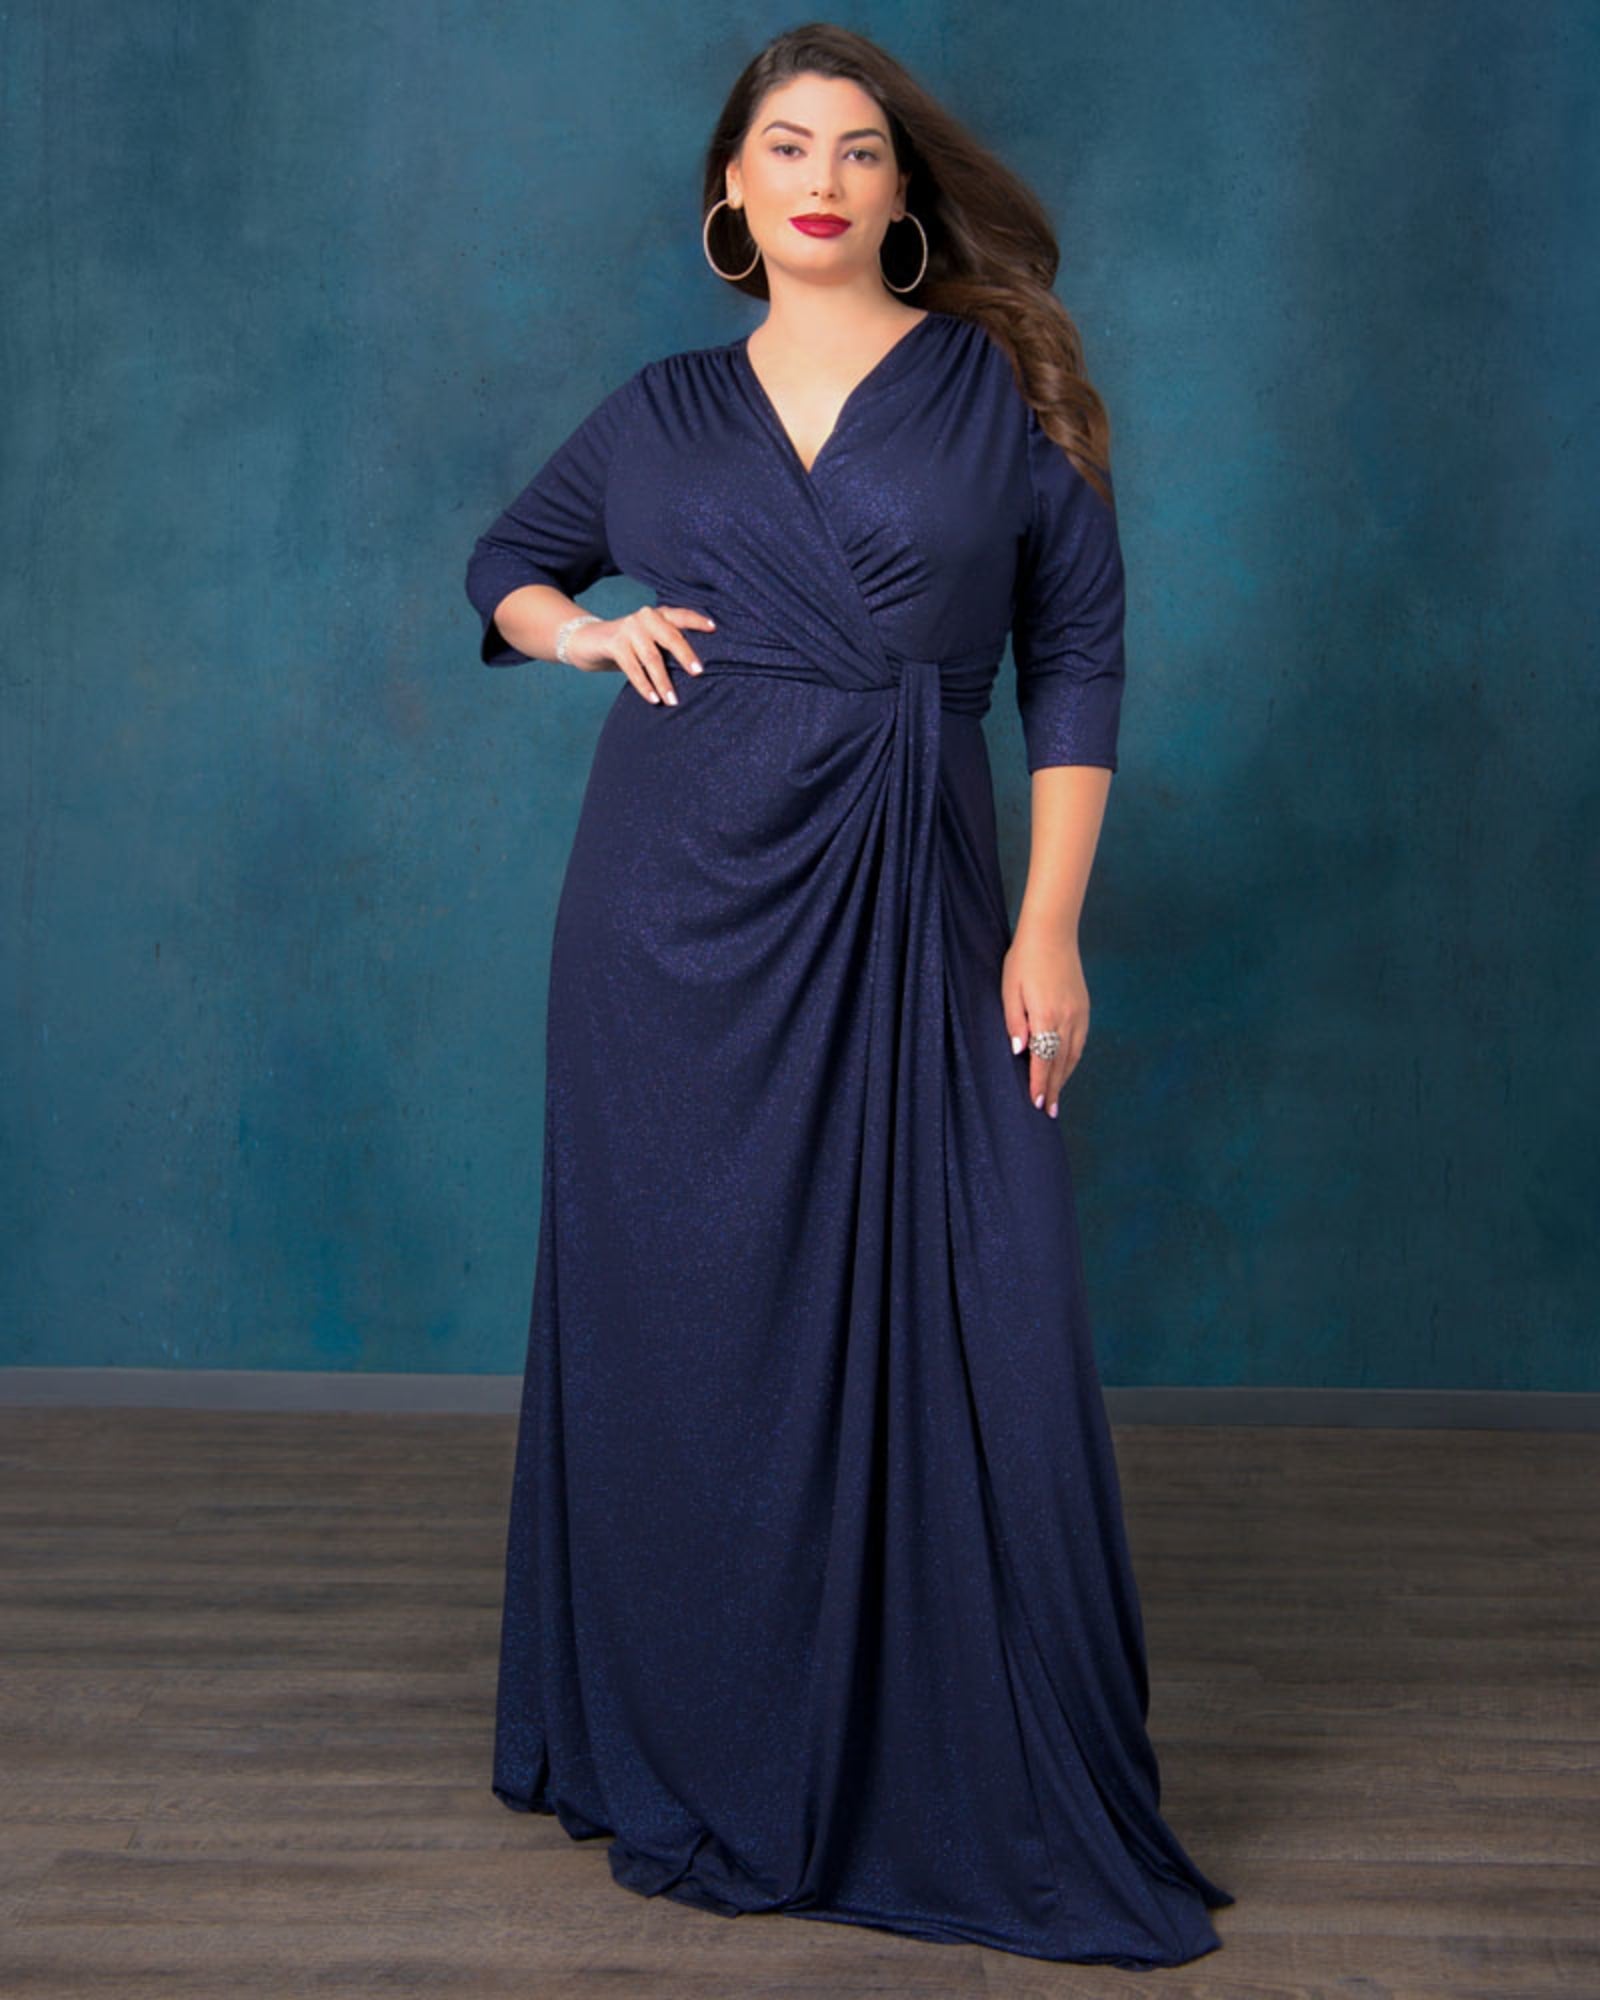 Romanced by Moonlight Gown | EVENING STAR